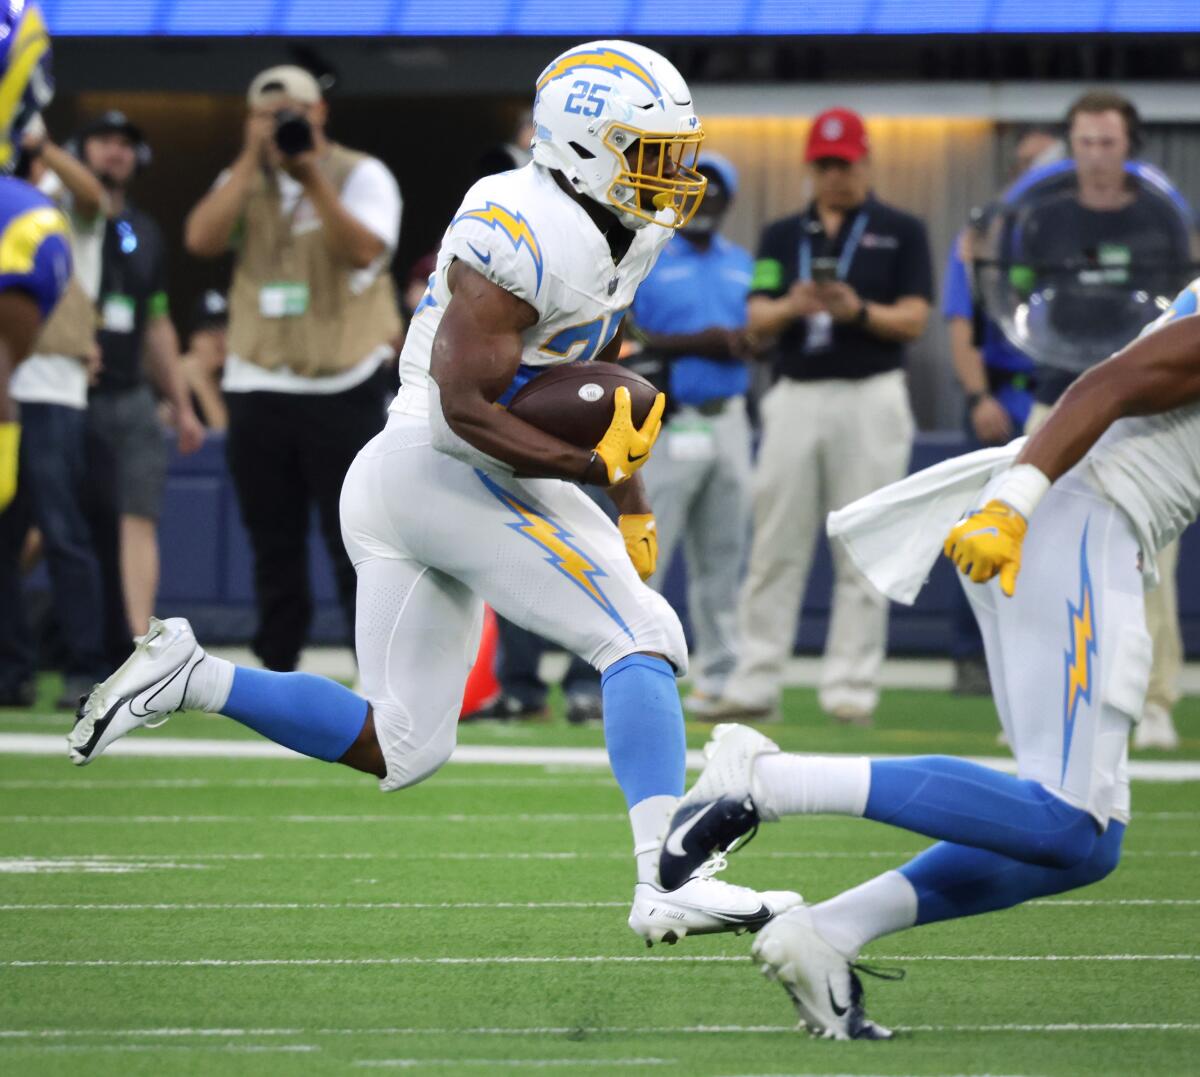 Chargers running back Joshua Kelley scrambles in the second quarter against the Rams on Saturday.